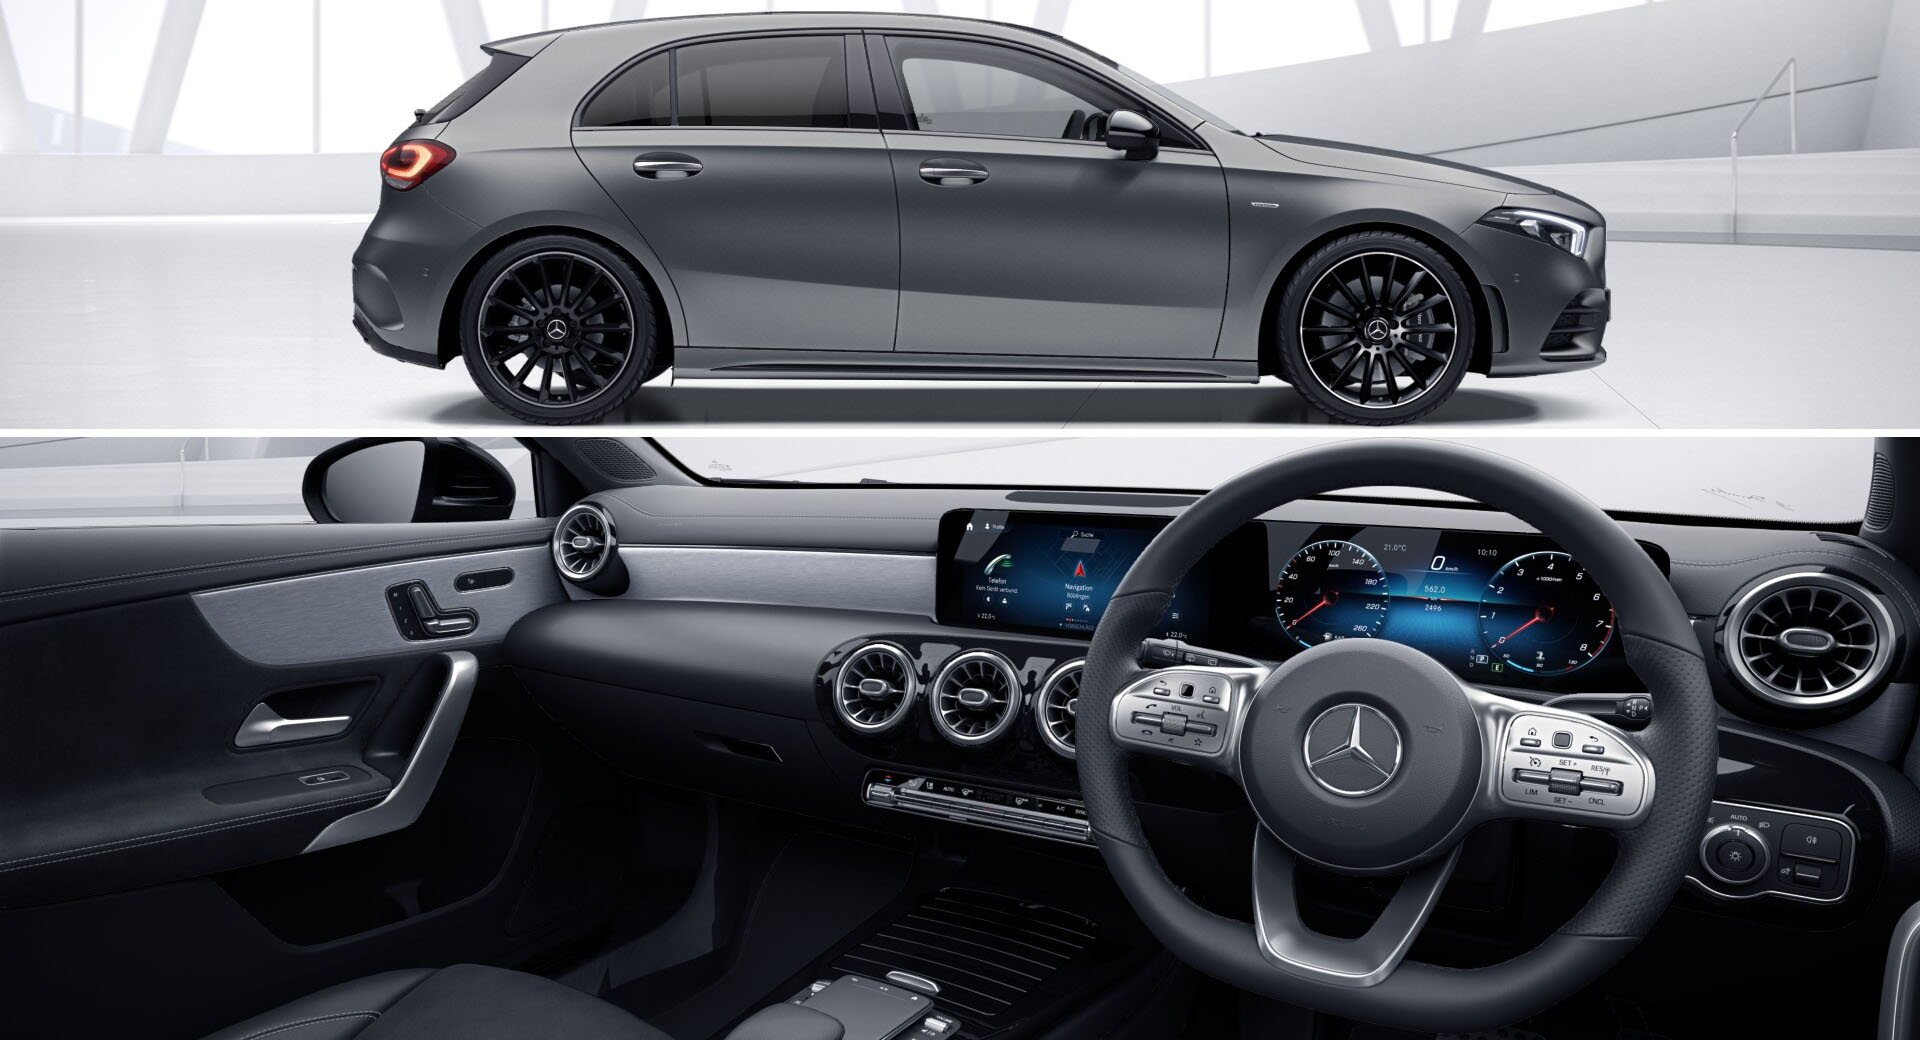 Mercedes A-Class Range Gets Exclusive Edition In The UK From £31,305